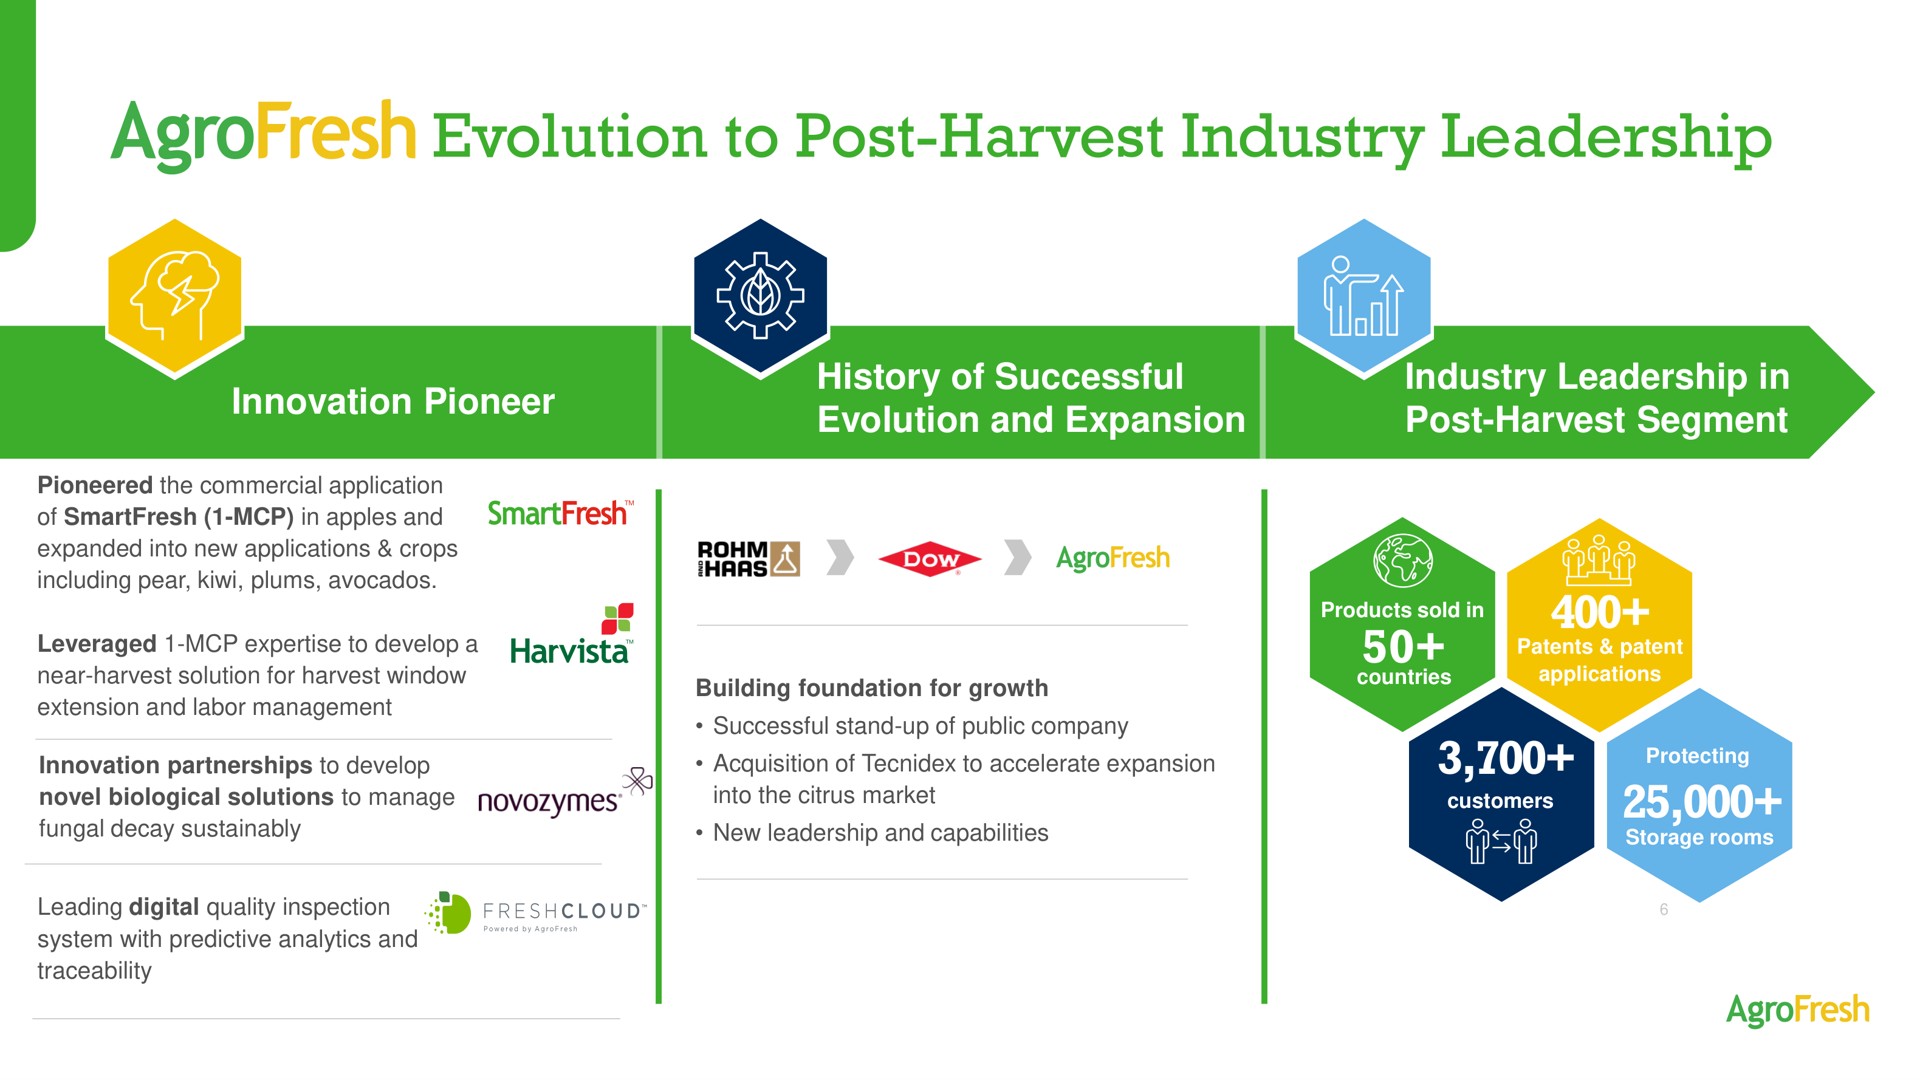 evolution to post harvest industry leadership and expansion segment | AgroFresh